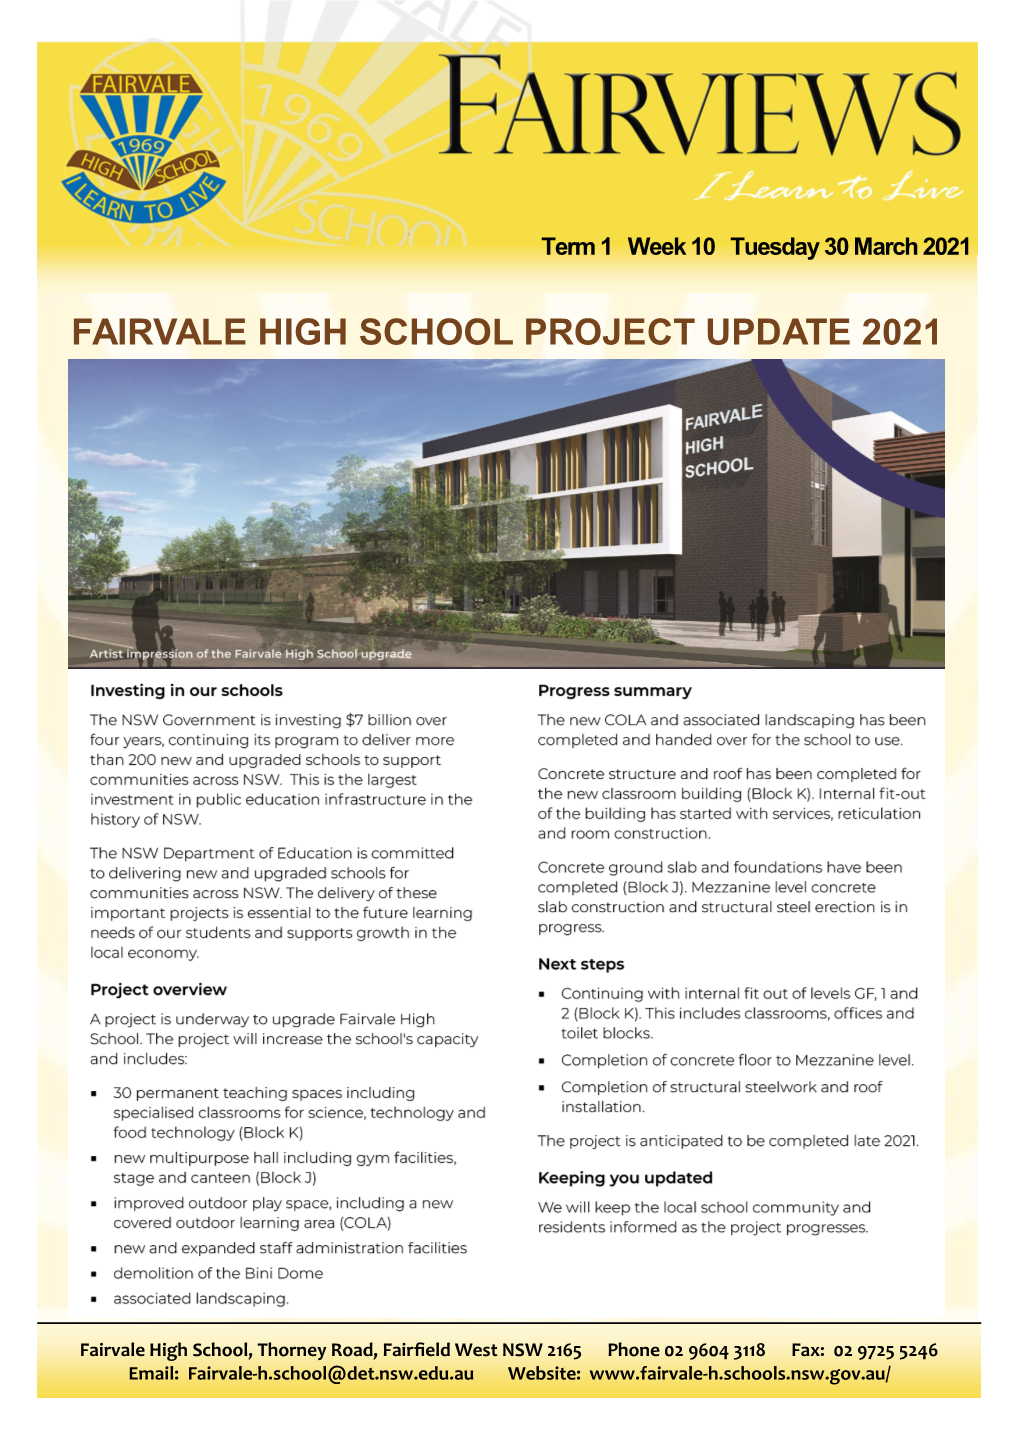 Fairvale High School Project Update 2021